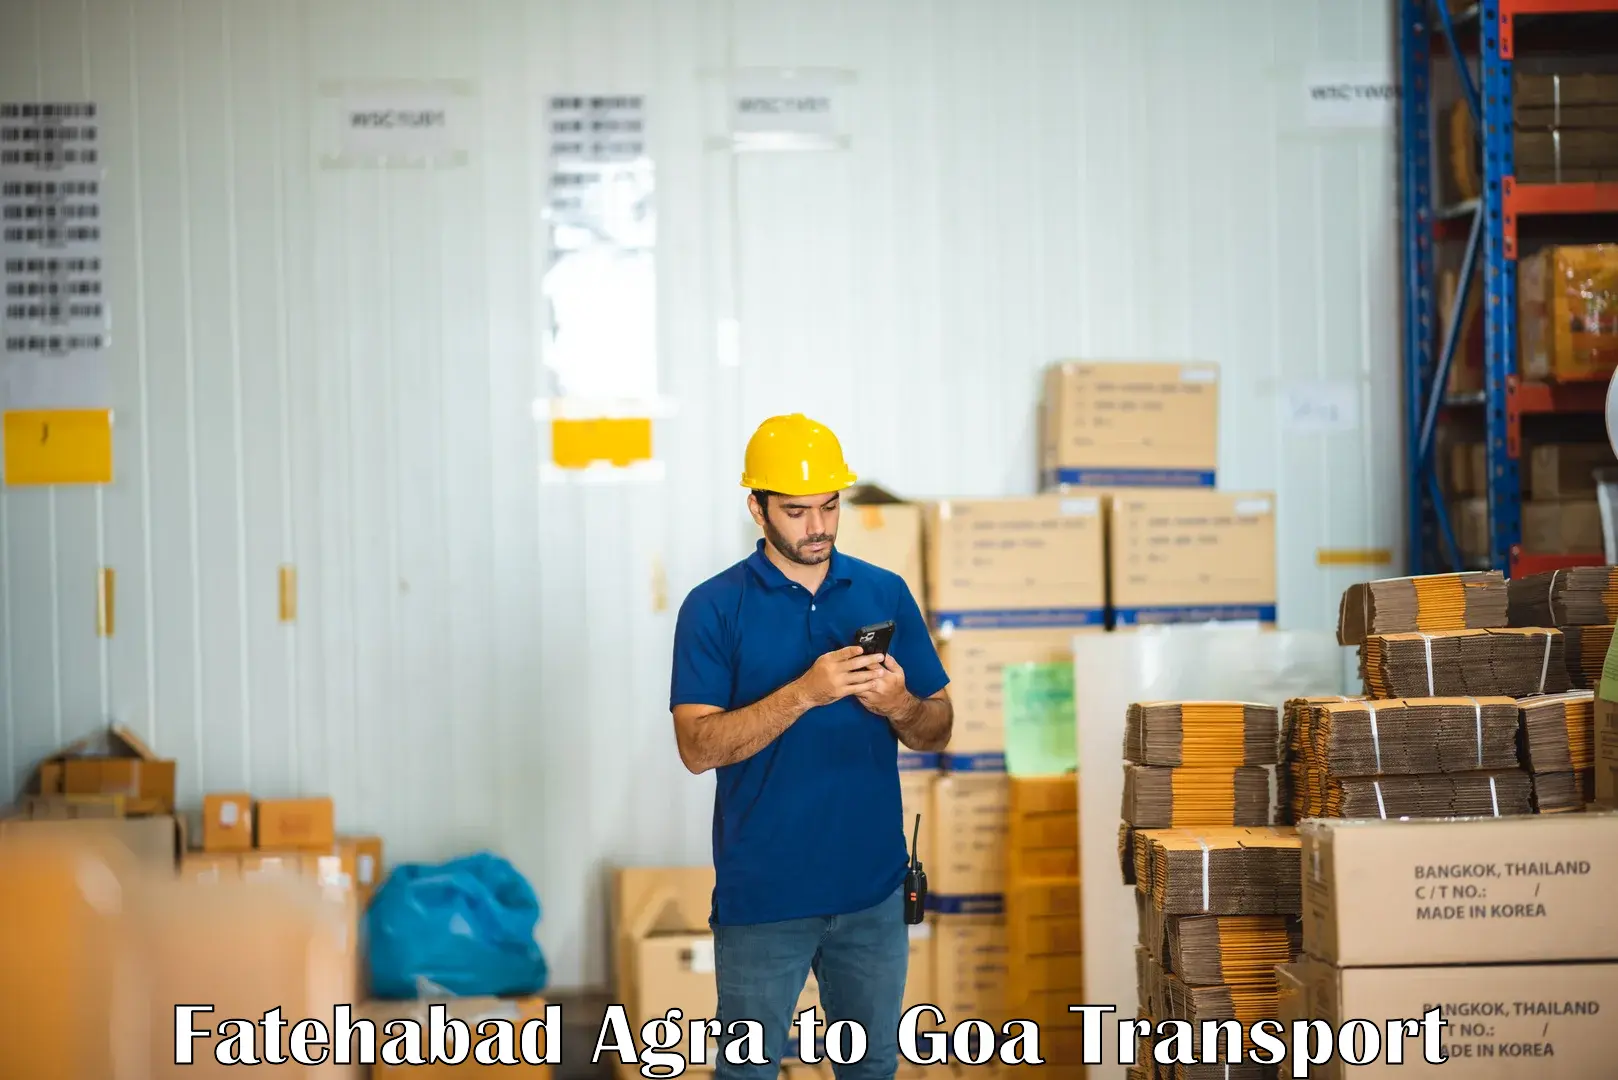 Container transport service Fatehabad Agra to Goa